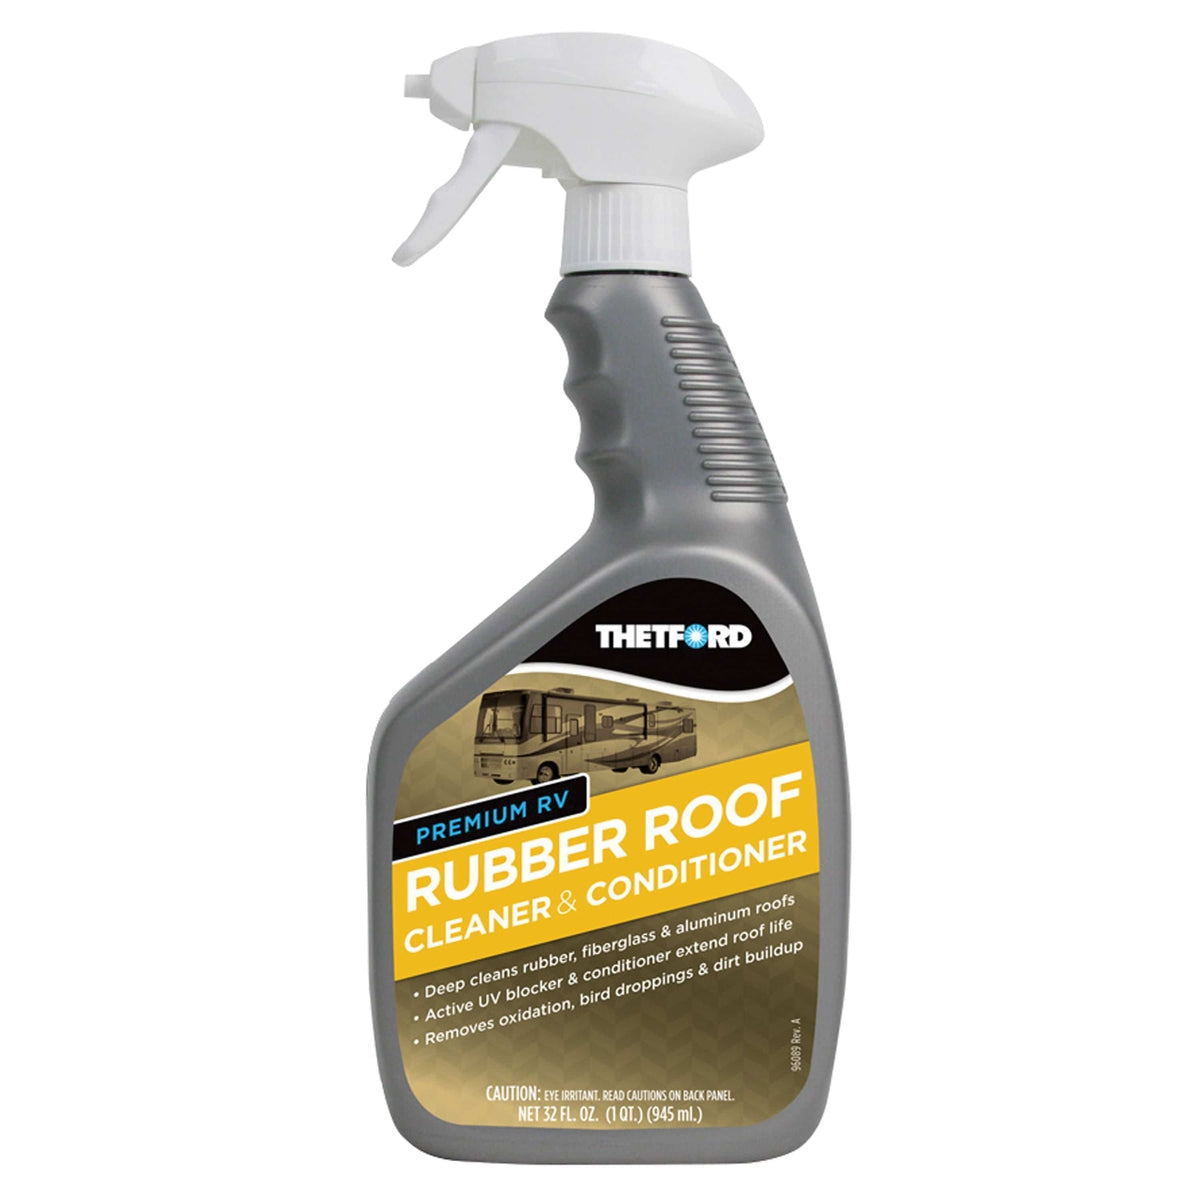 Thetford Premium RV Rubber Roof Cleaner and Conditioner 32 oz #32512